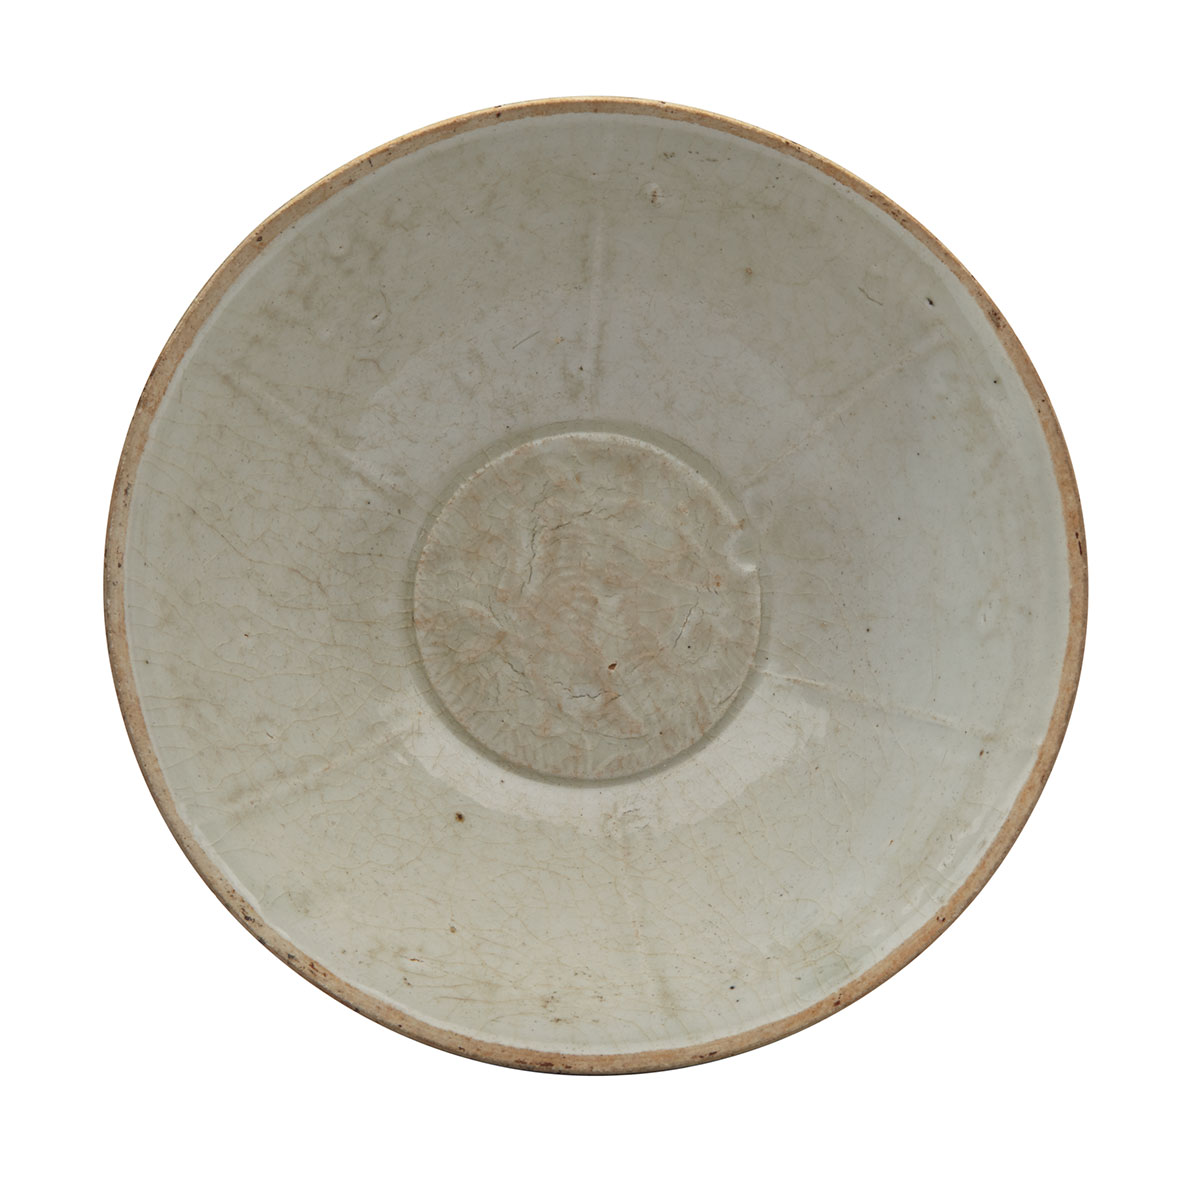 Moulded Yingqing Bowl, Song Dynasty